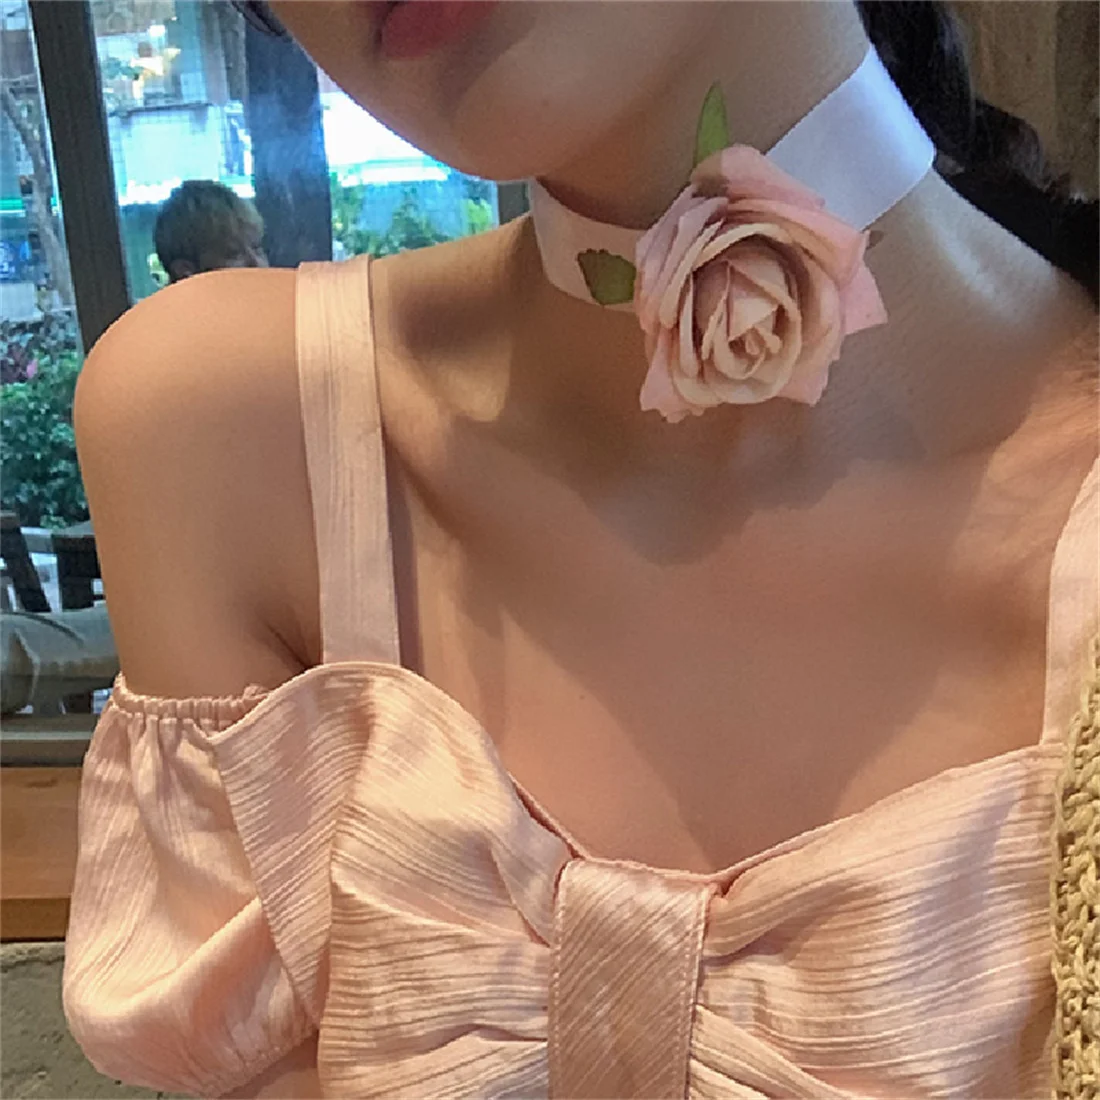 

Nice Clavicular Chain 3D Rose Romantic Fashion Elegant Hair Accessories Headwear Necklace Choker Necklace Wear Hair Streamers